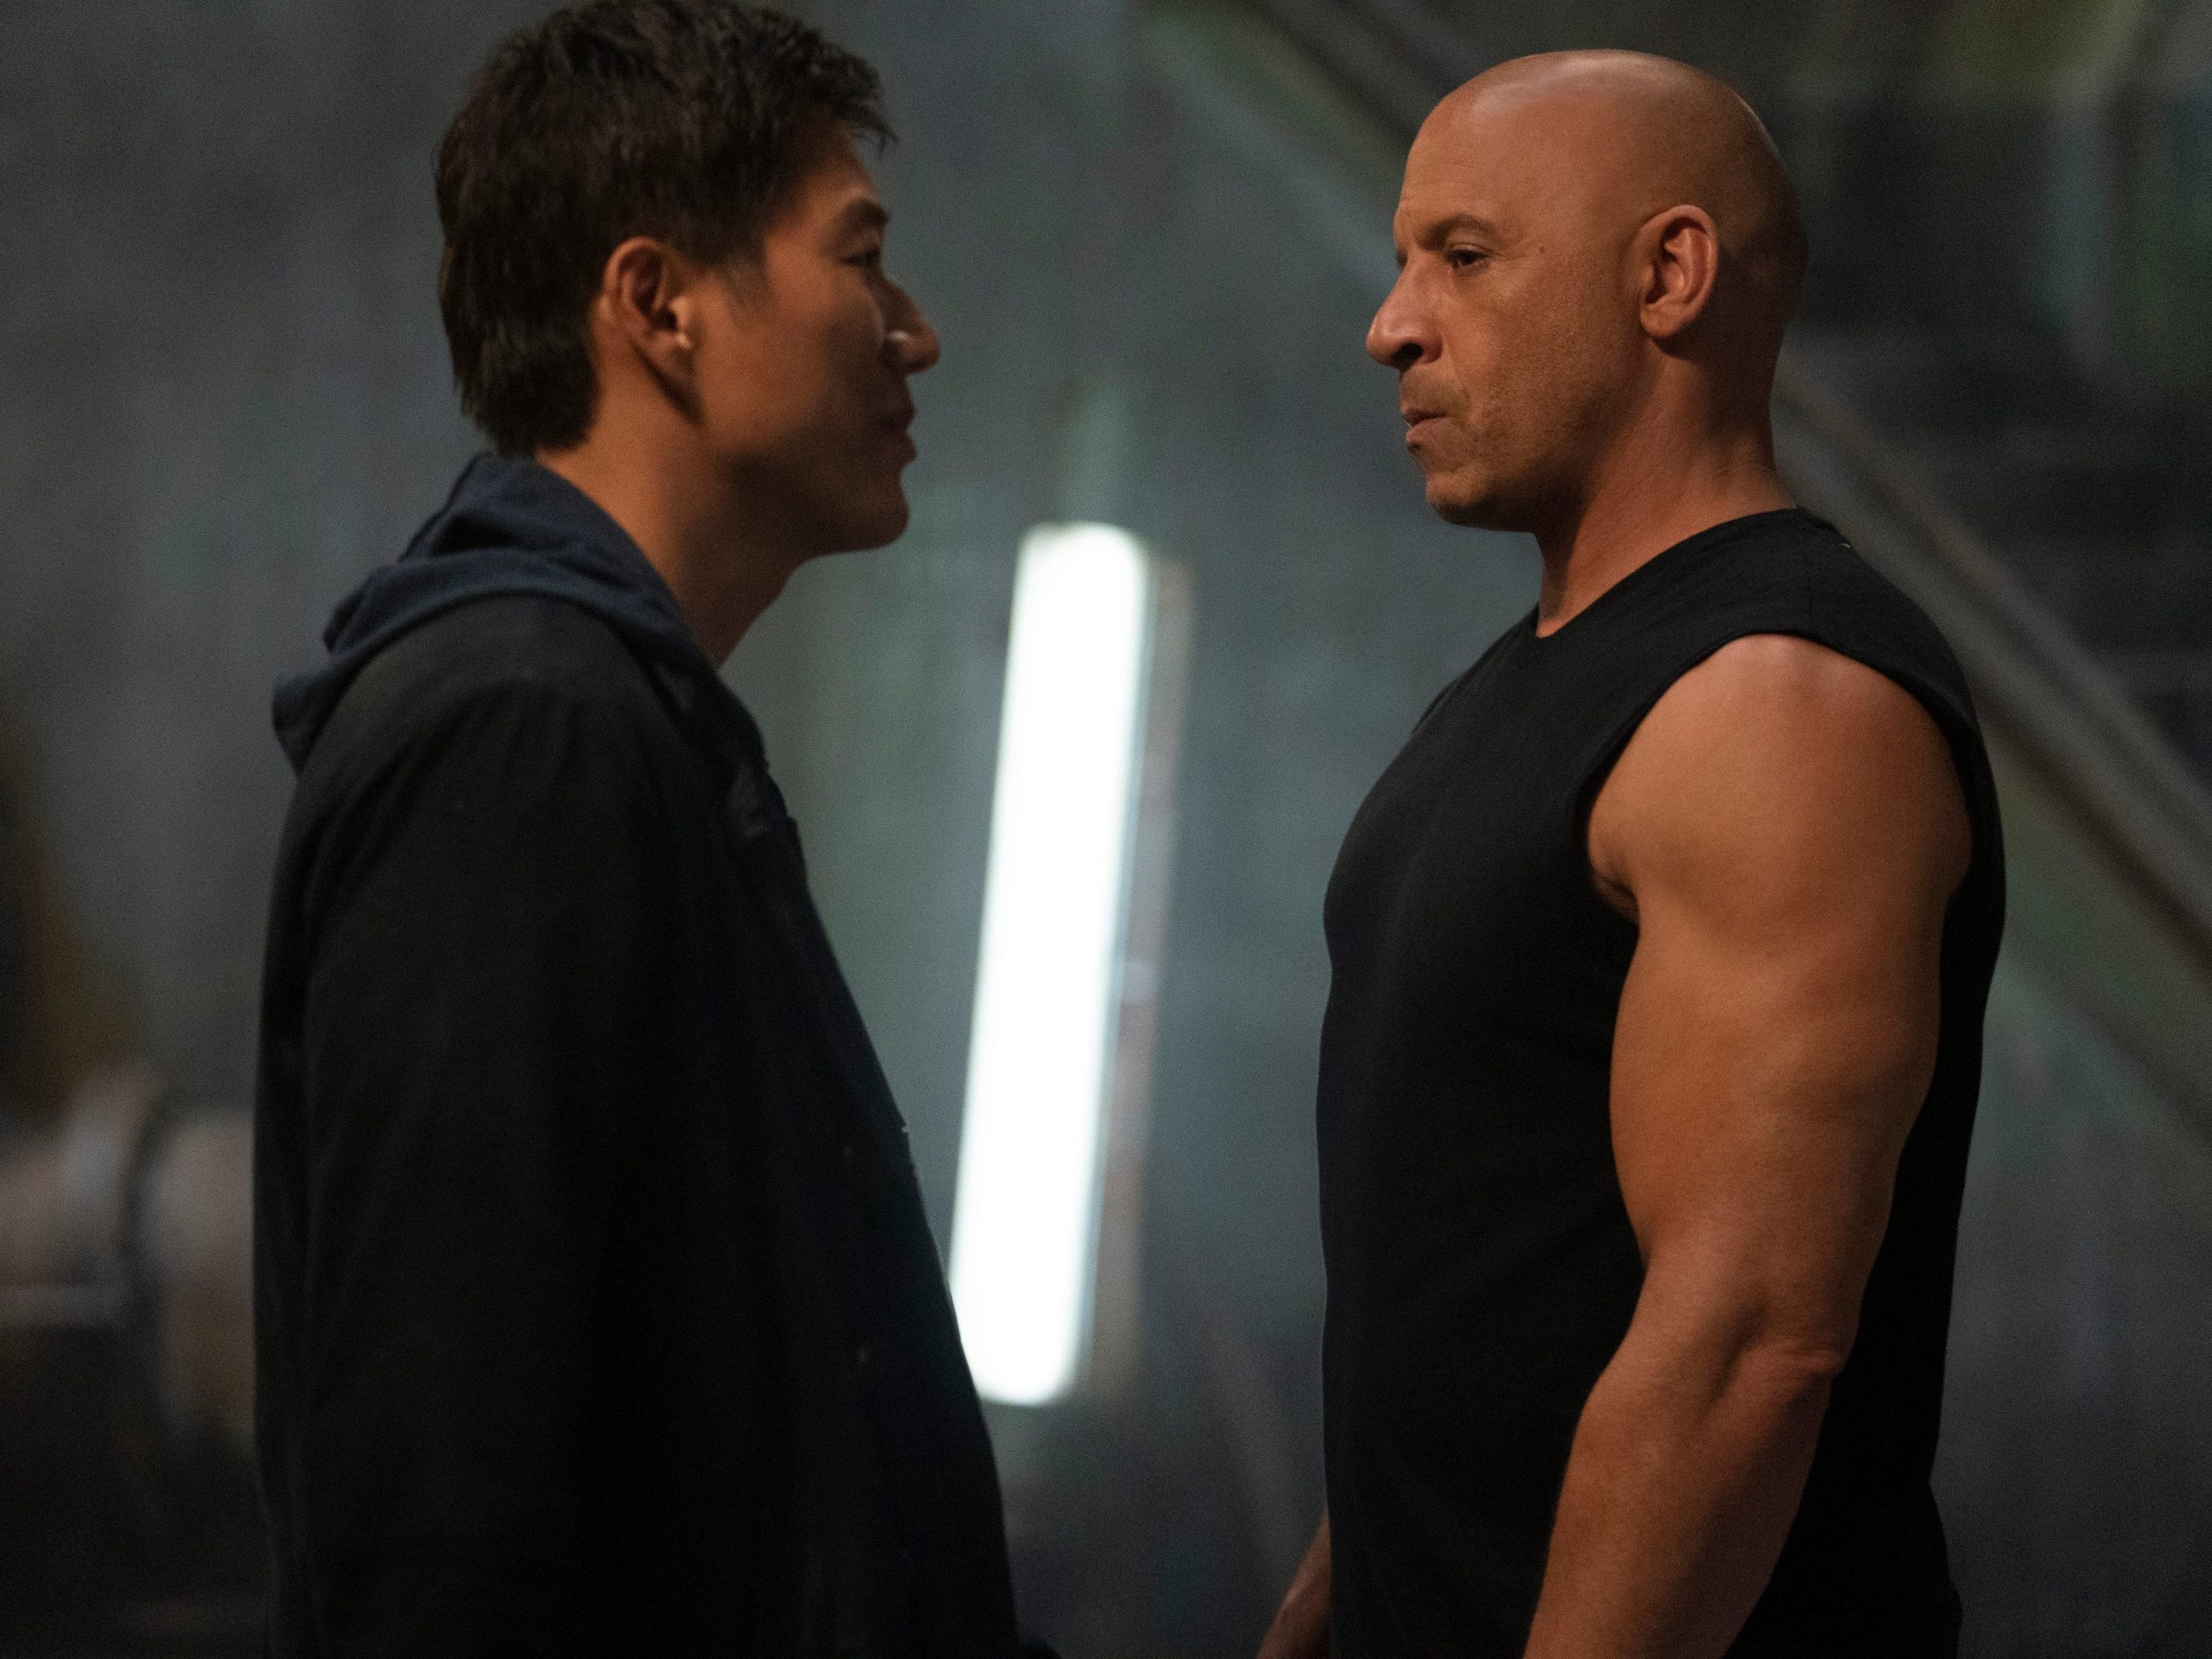 Han (Sung Kang) and Dom (Vin Diesel) in "F9"